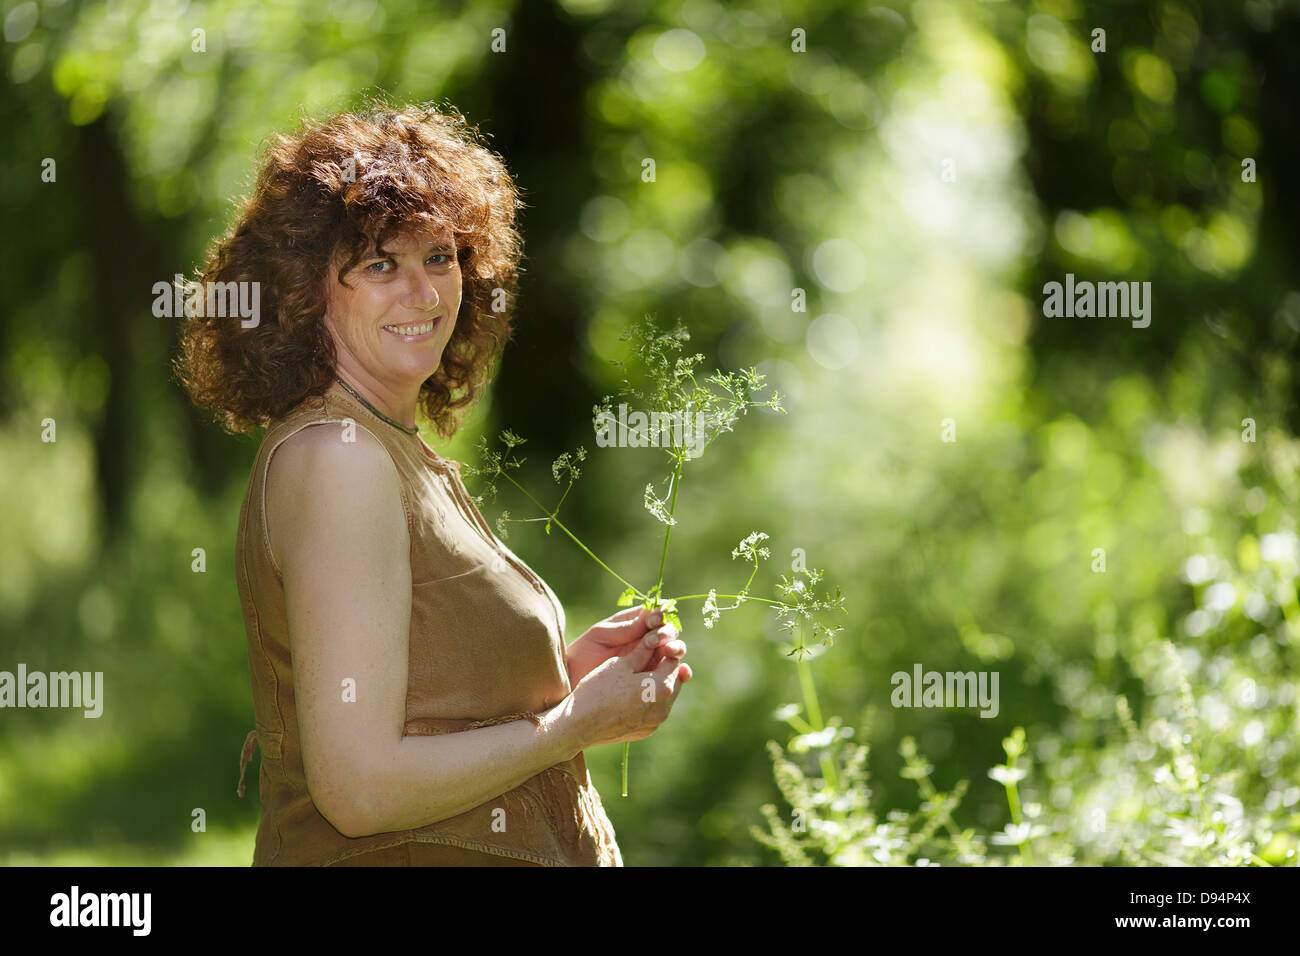 Middle aged mature woman enjoying nature holding wildflower in forest Stock Photo